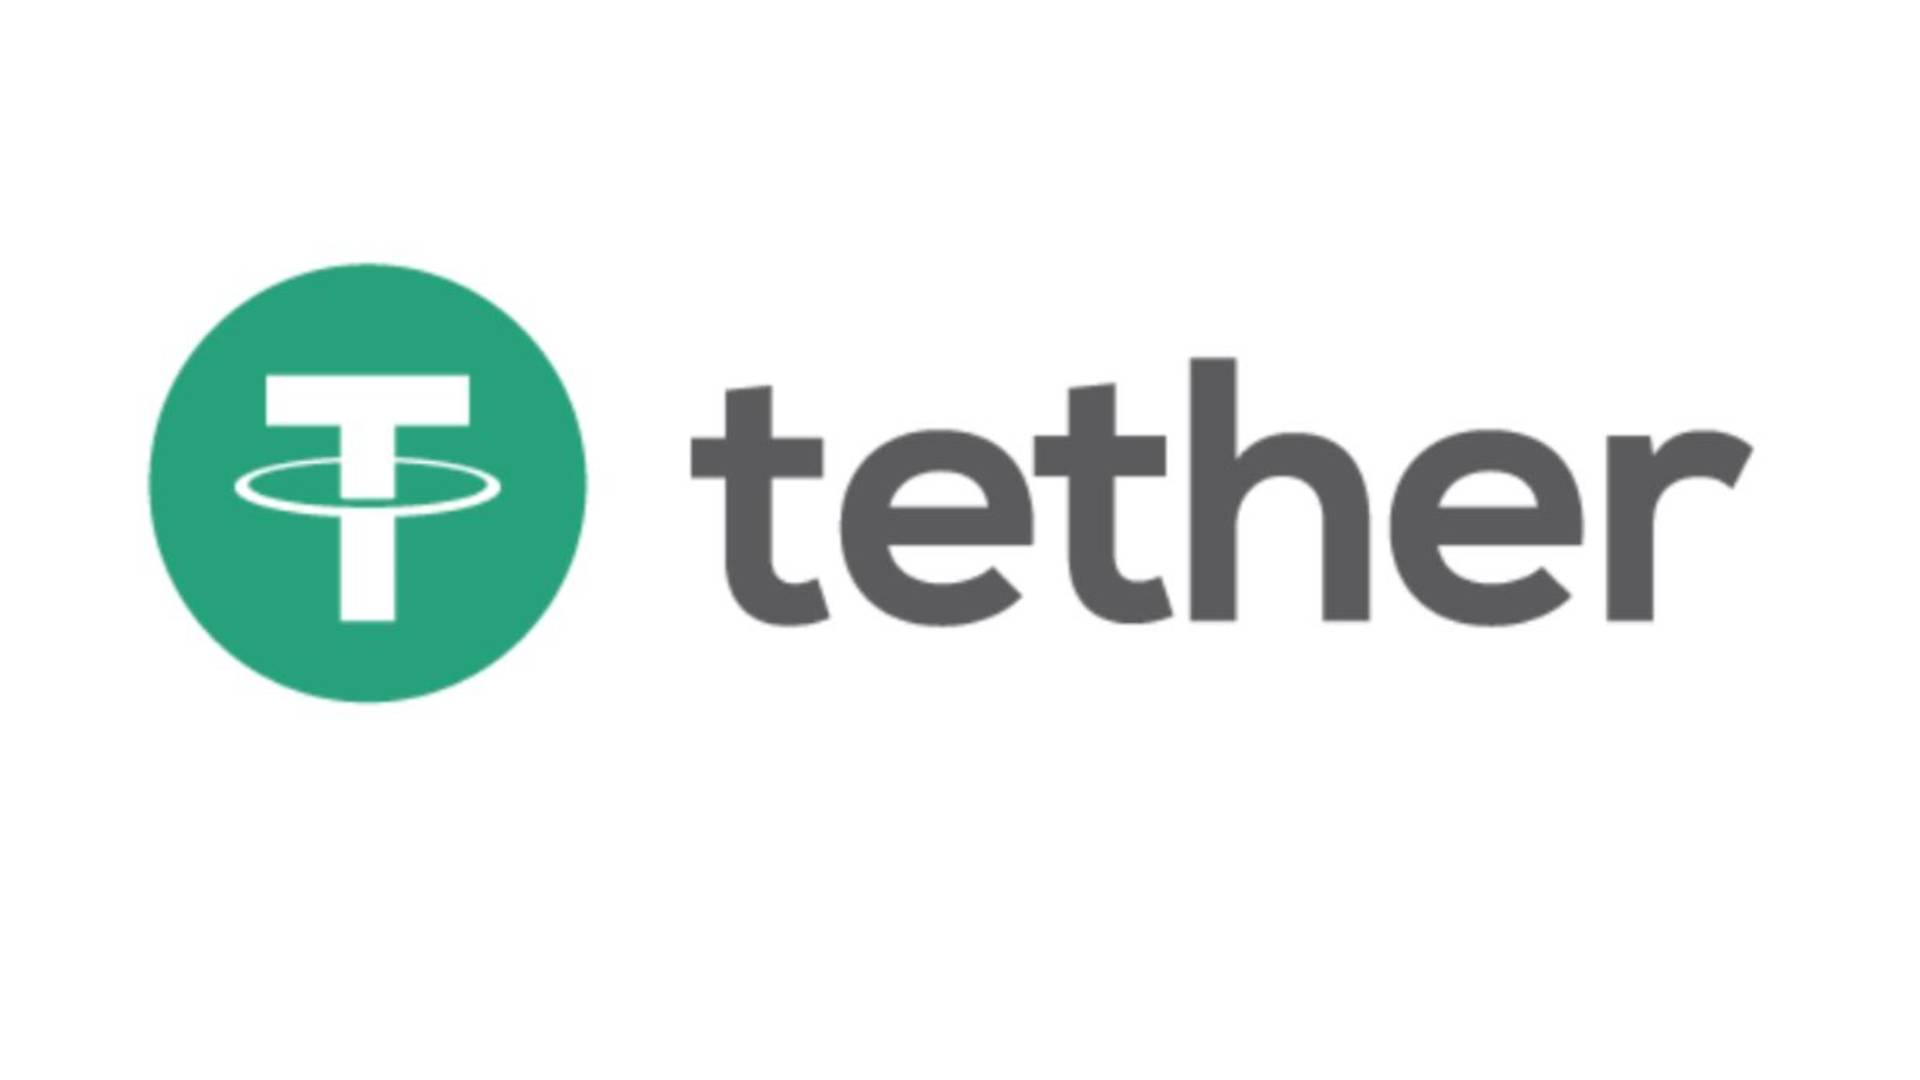 How to Buy Tether (USDT): A Step-by-Step Guide for 2021